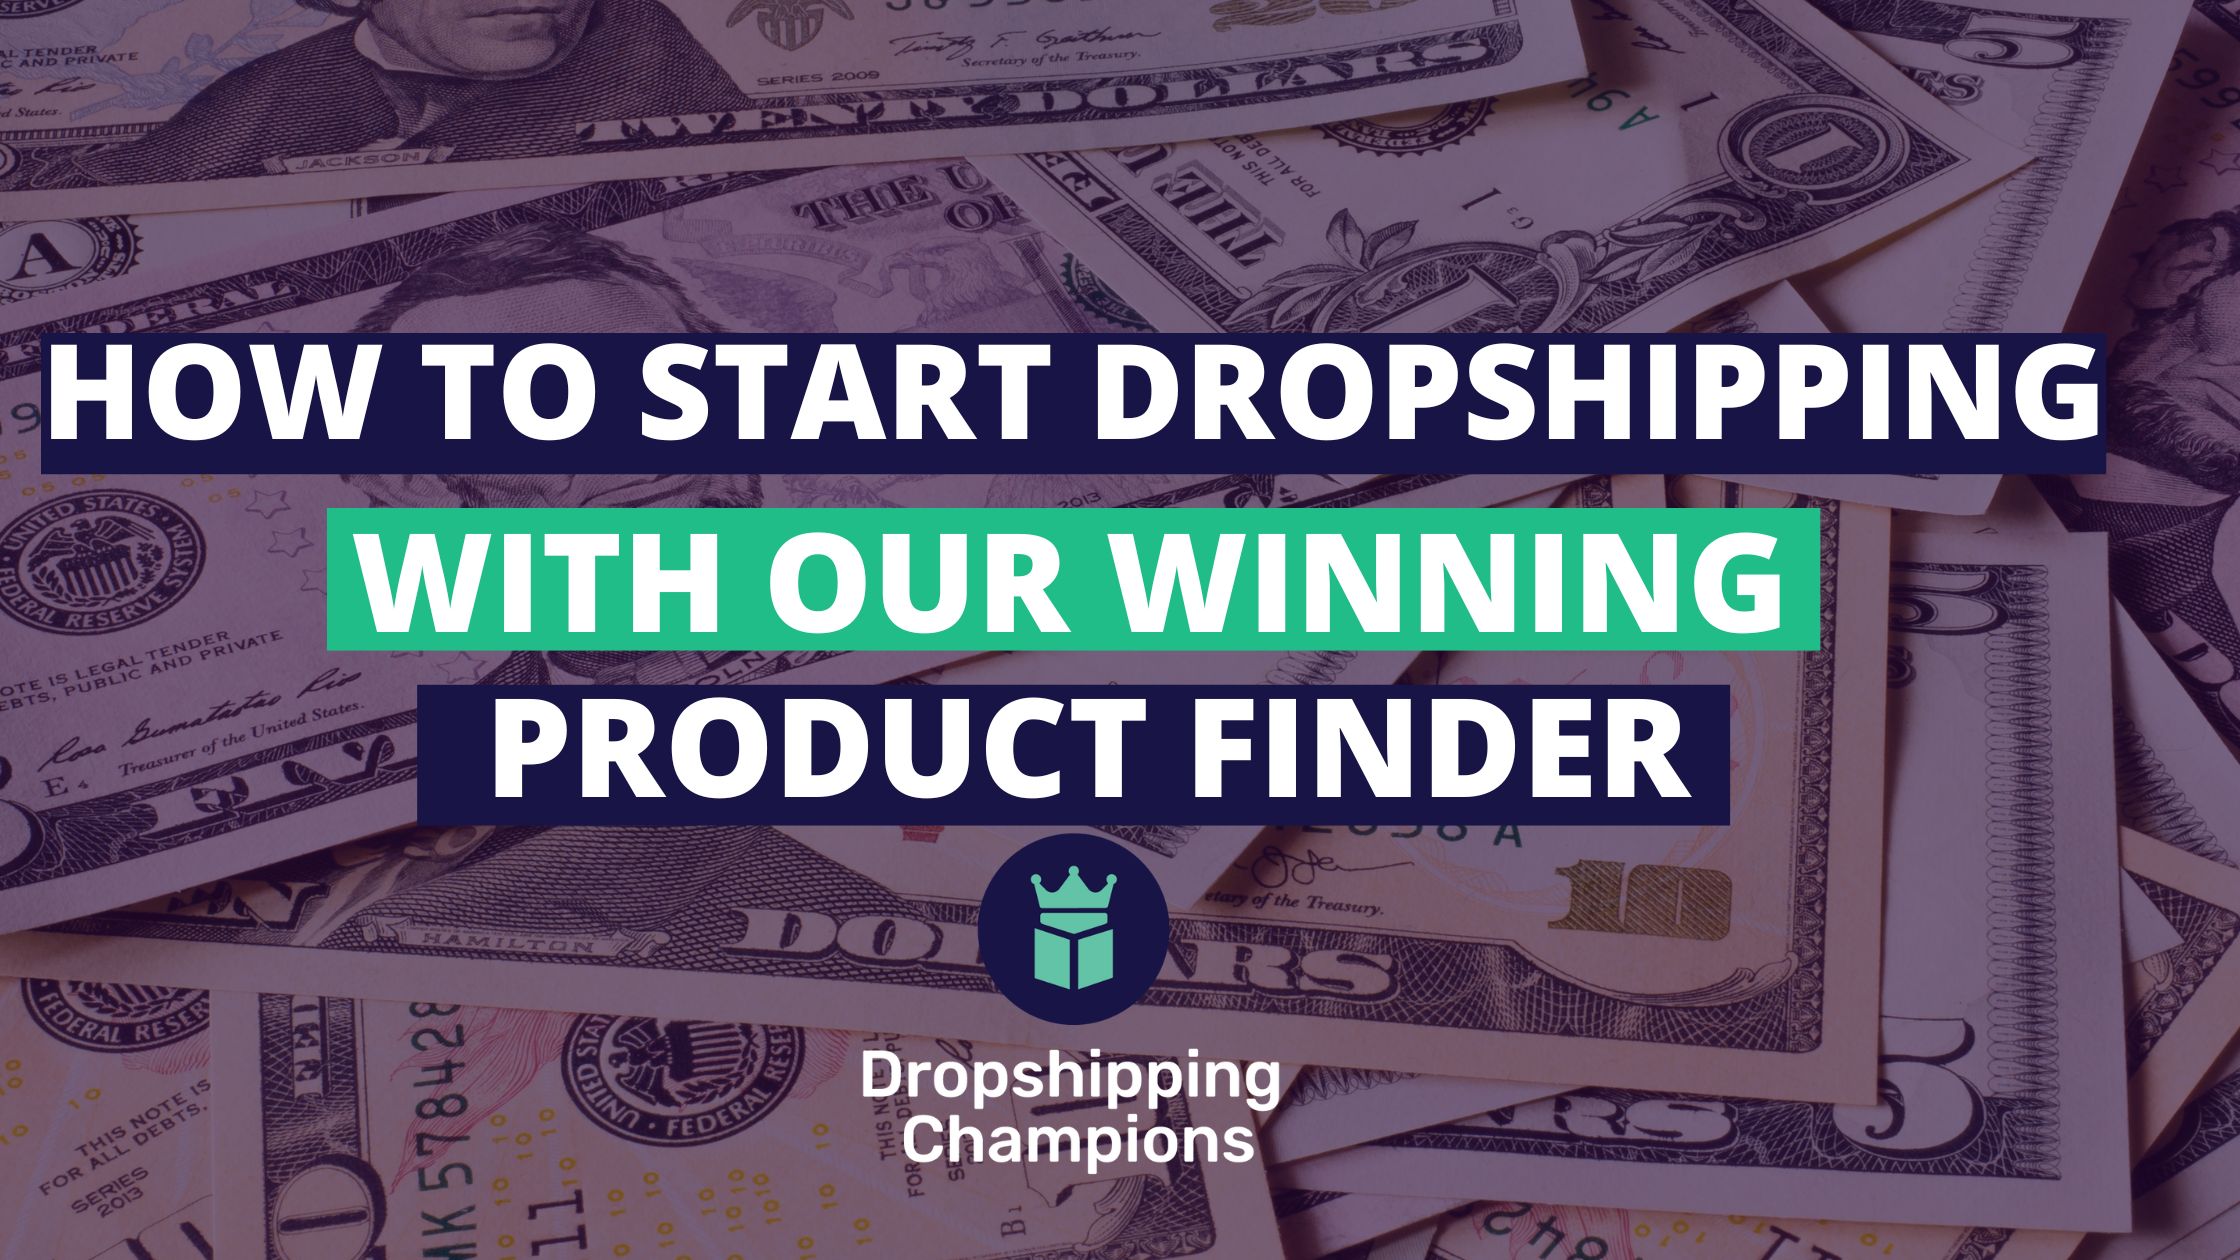 How to Start 1 Dropshipping Business With Our Winning Product Finder.